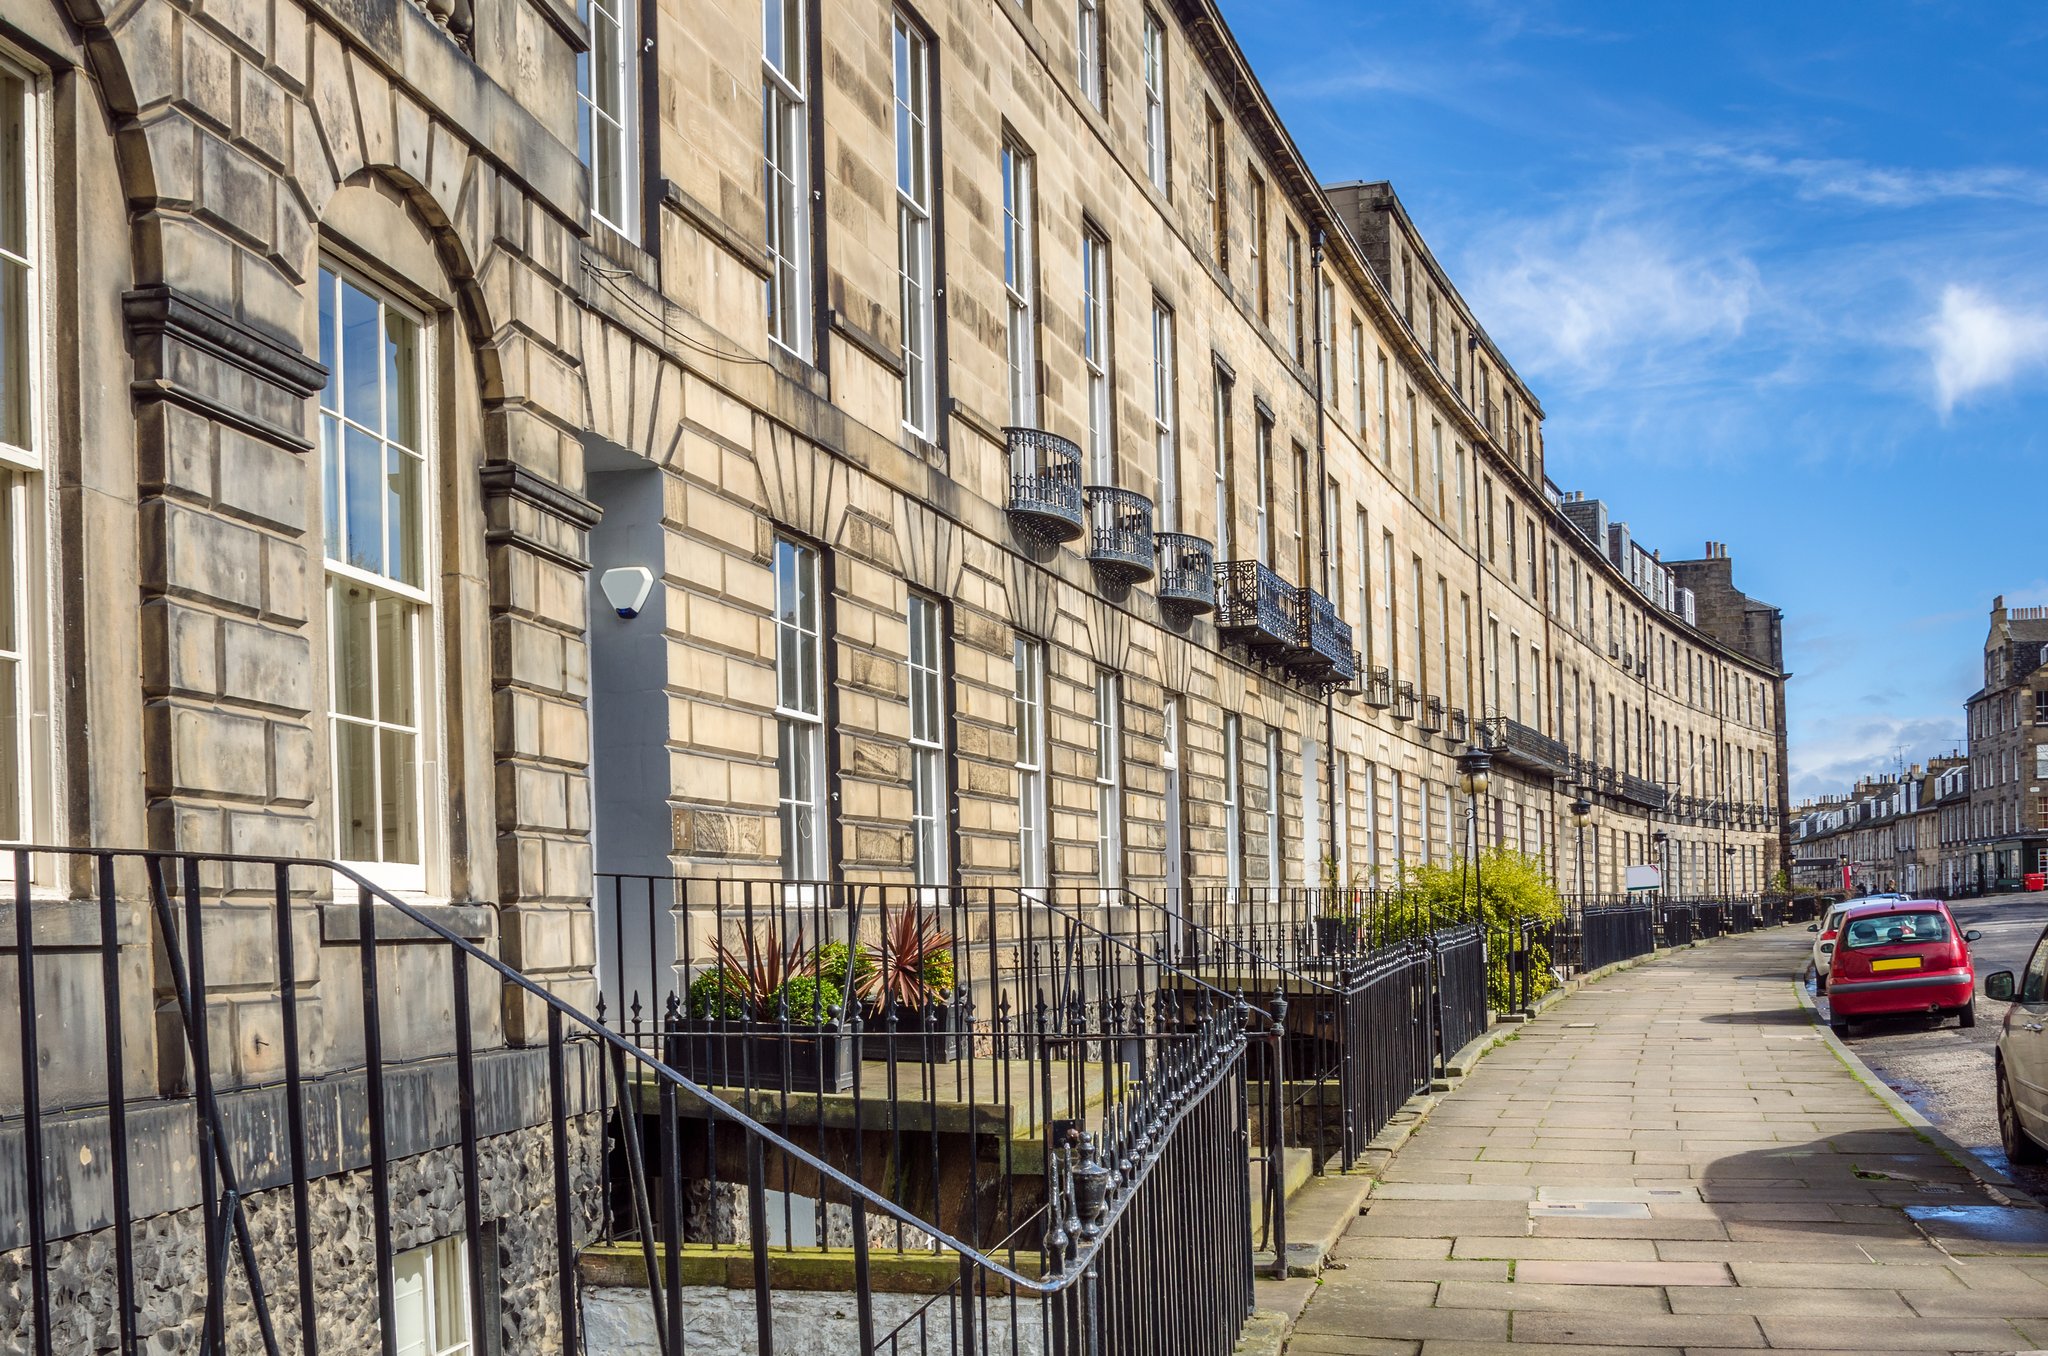 Images of townhouses in Edinburgh New Town